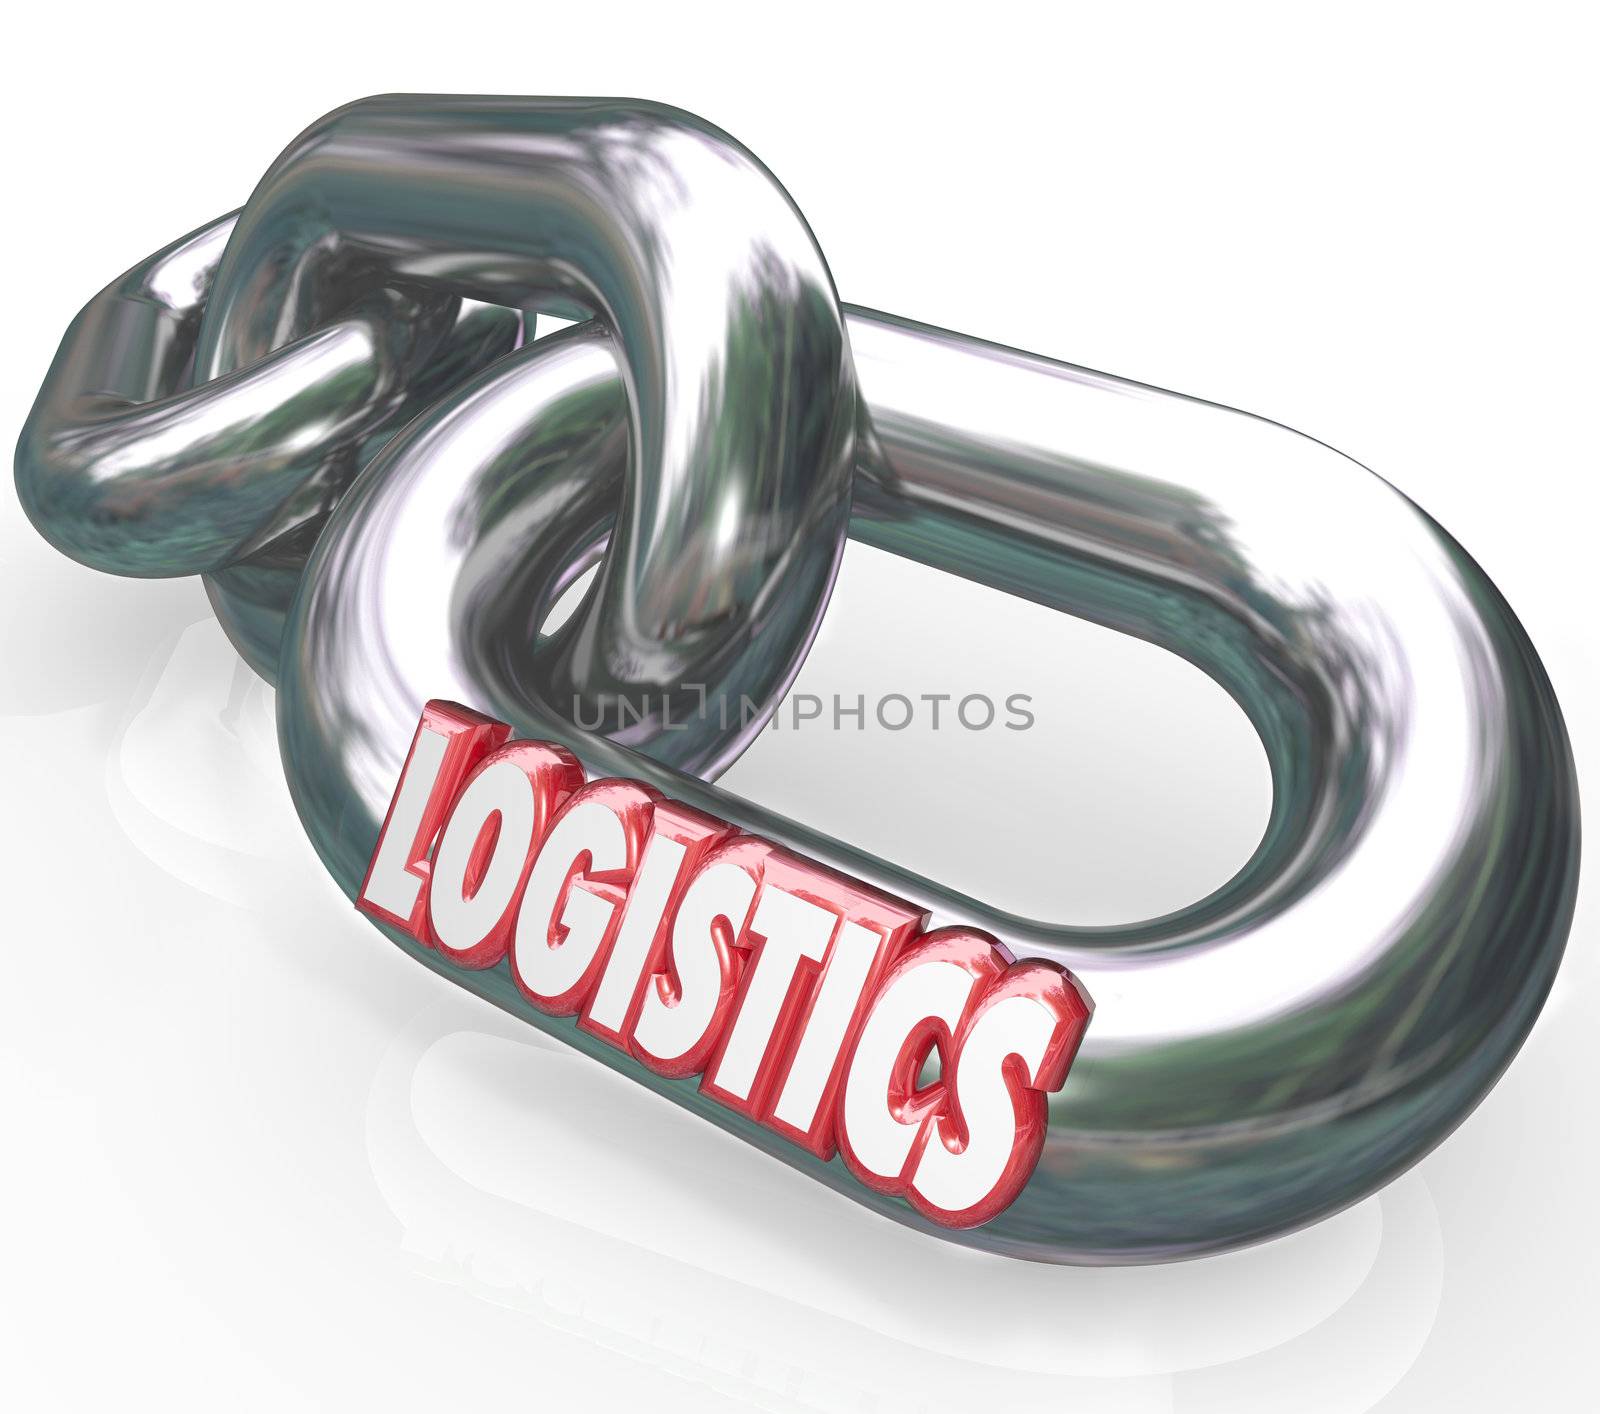 The word Logistics on a metal chain link connected to other chains and links to form an organized and coordinated system of working together